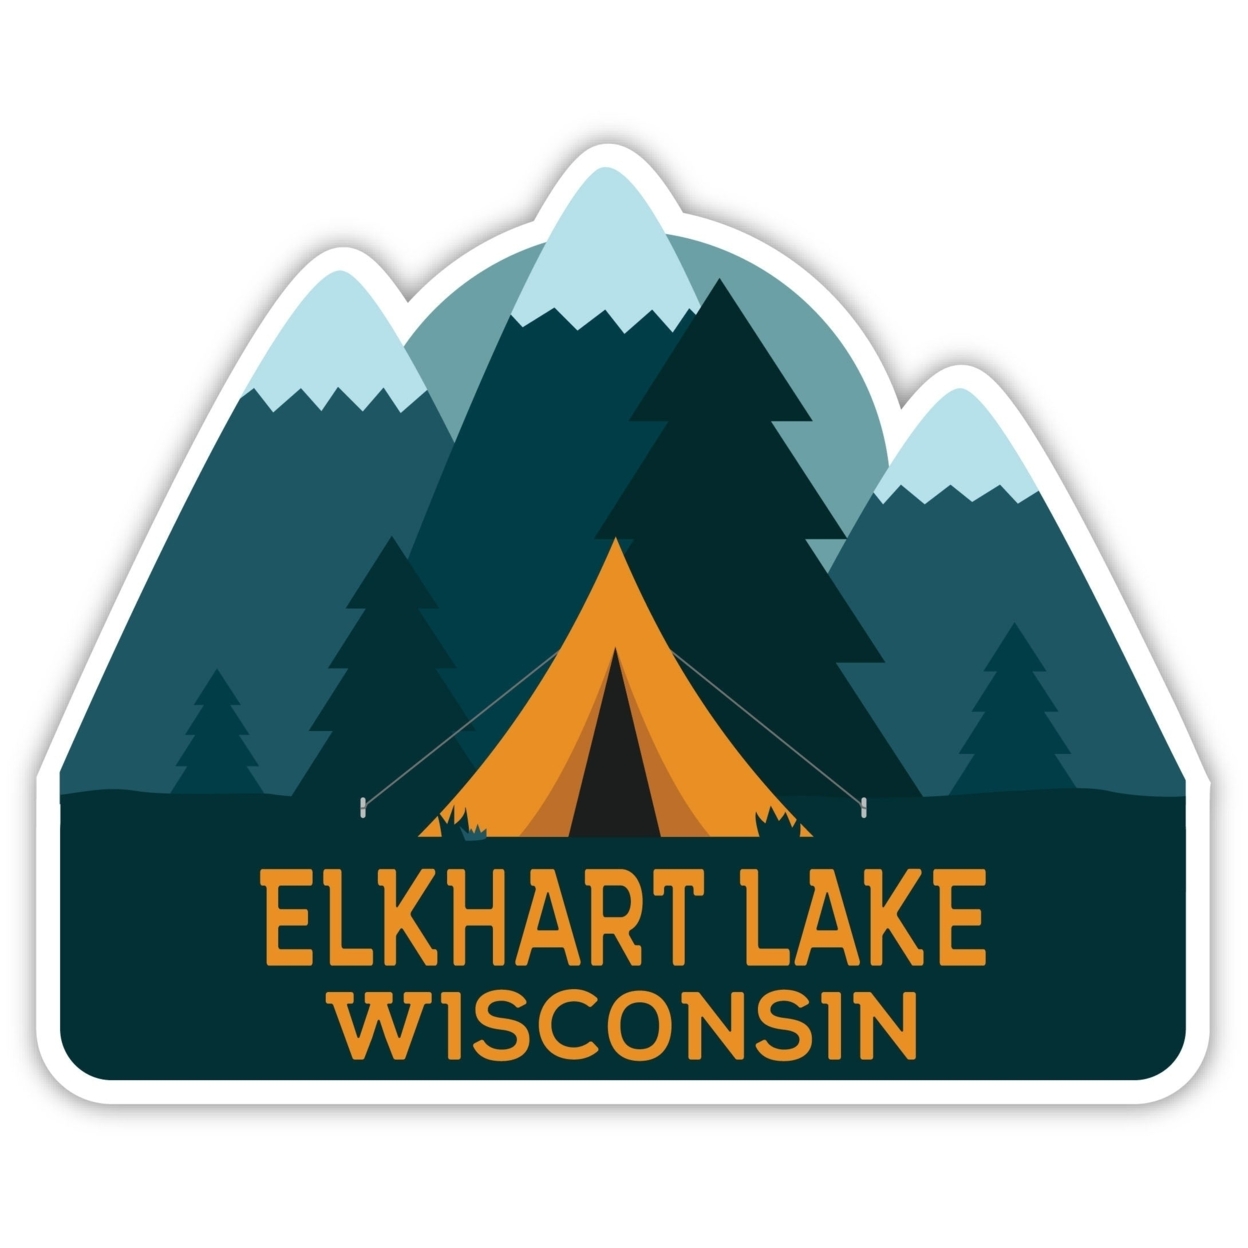 Elkhart Lake Wisconsin Souvenir Decorative Stickers (Choose Theme And Size) - 4-Pack, 2-Inch, Tent